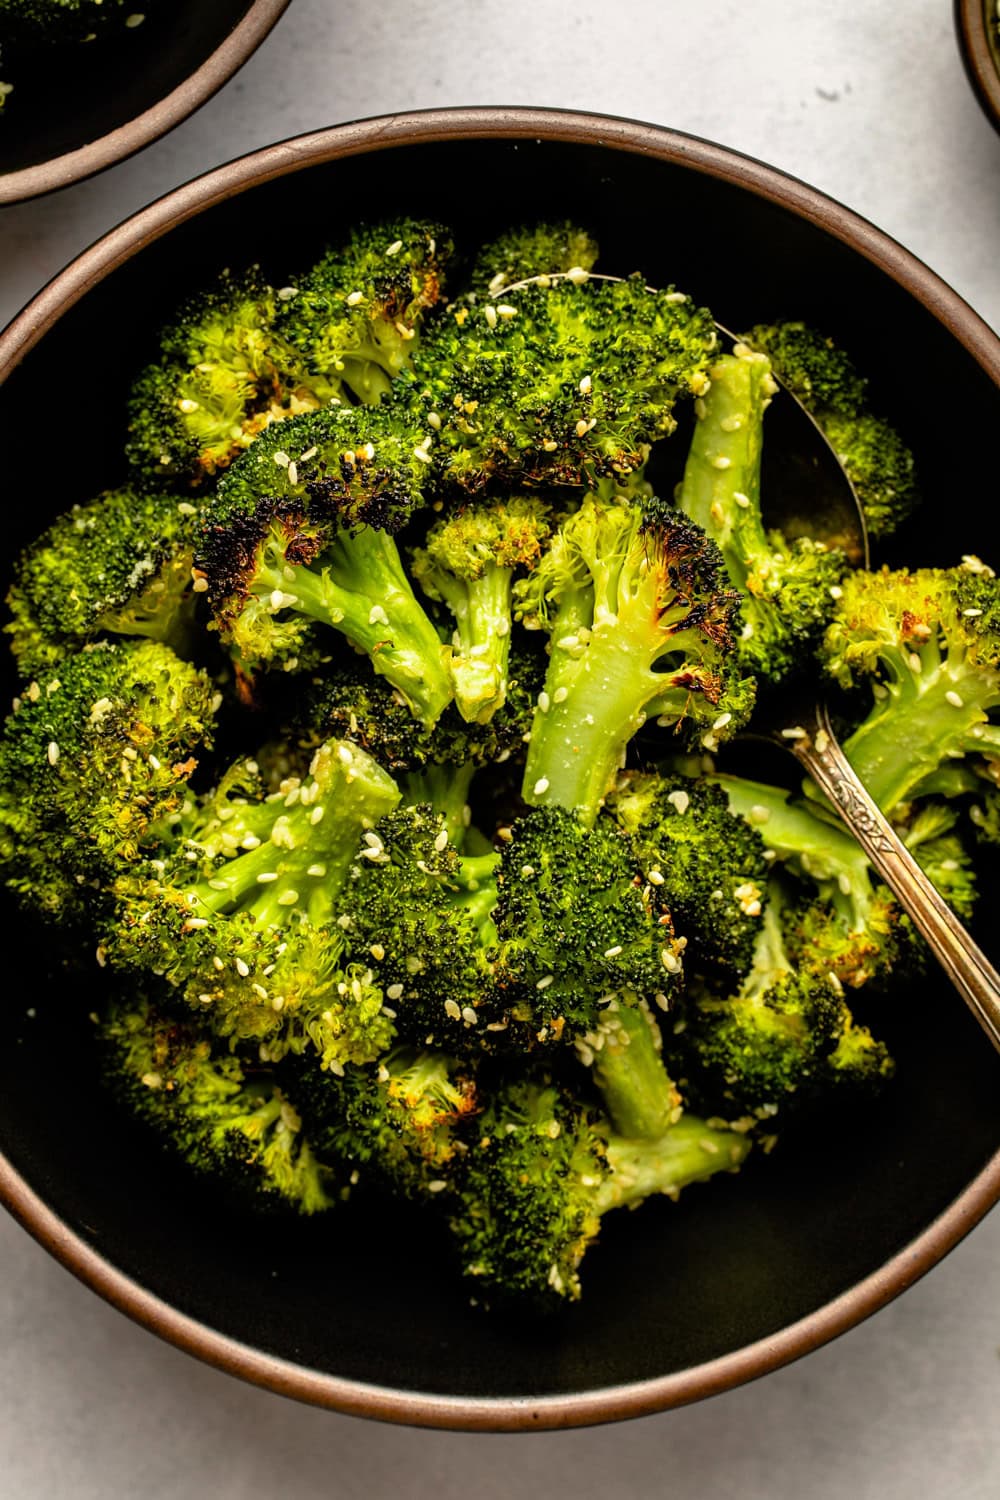 roasted garlic sesame broccoli served in a black bowl with a metal spoon scooping up several broccoli